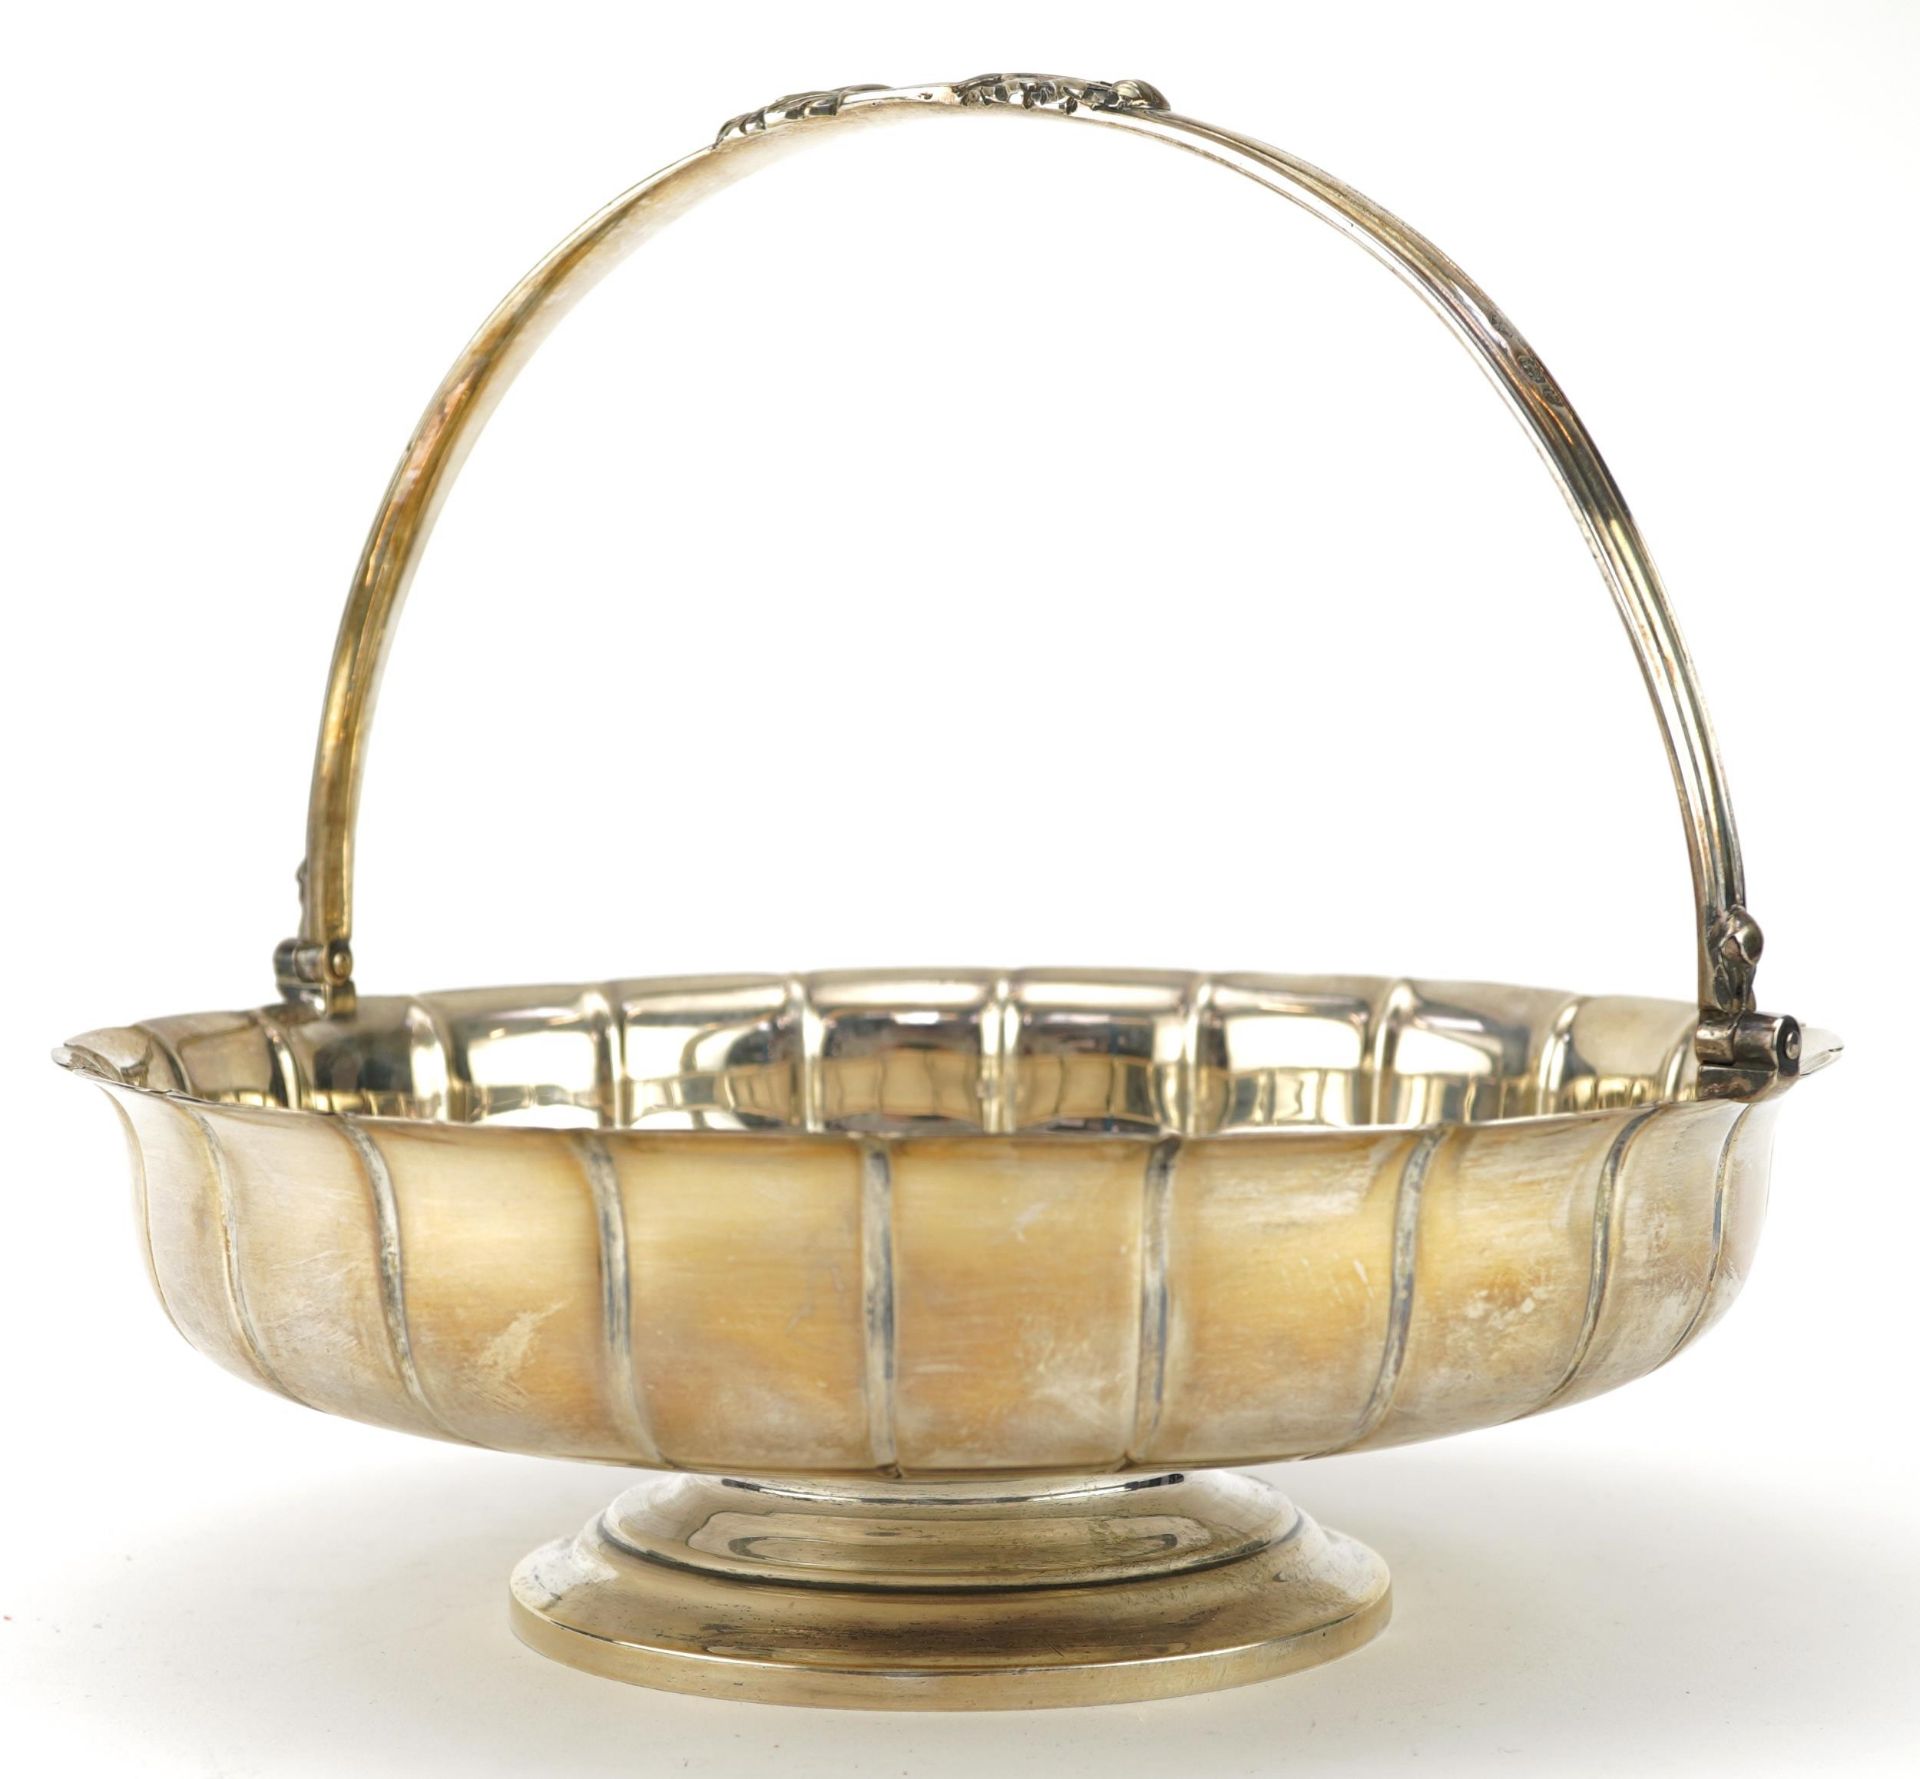 Holland, Aldwinckle & Slater, Edward VII heavy silver fruit bowl with swing handle, London 1908, - Image 2 of 5